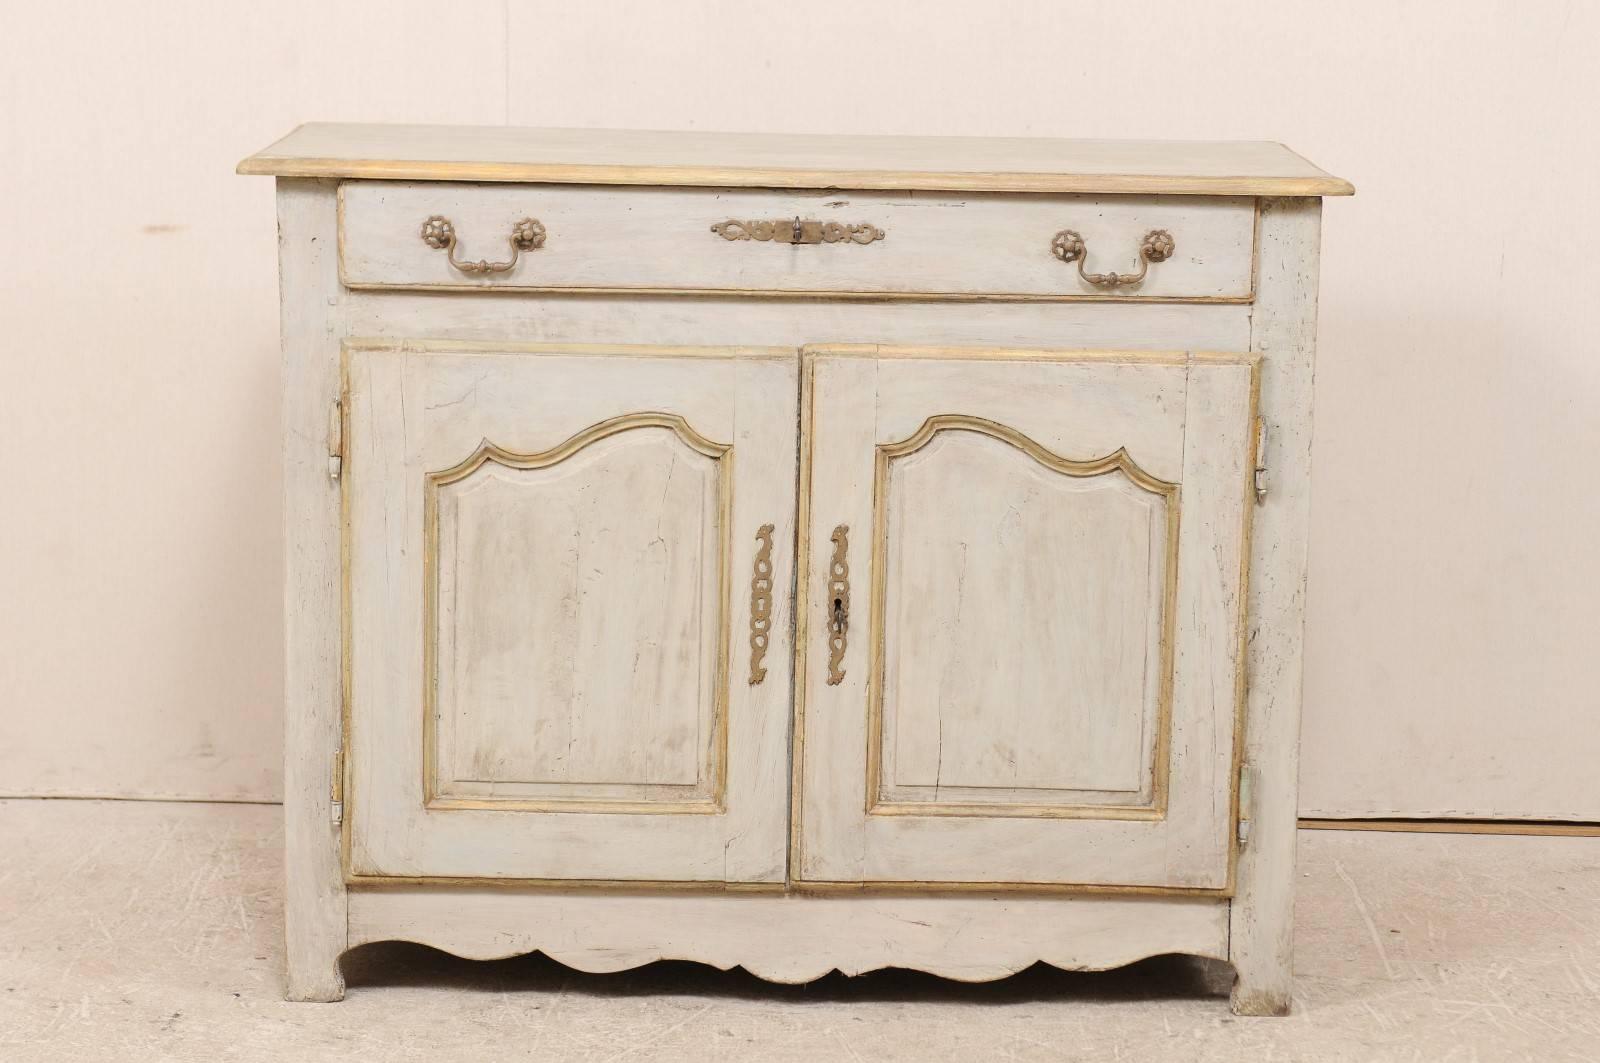 A French 18th century painted wood buffet. This French antique painted wood buffet features a single drawer over two doors. The panels on the doors have been delicately carved. There are two oblong rectangle recessed panels at each chest side. The